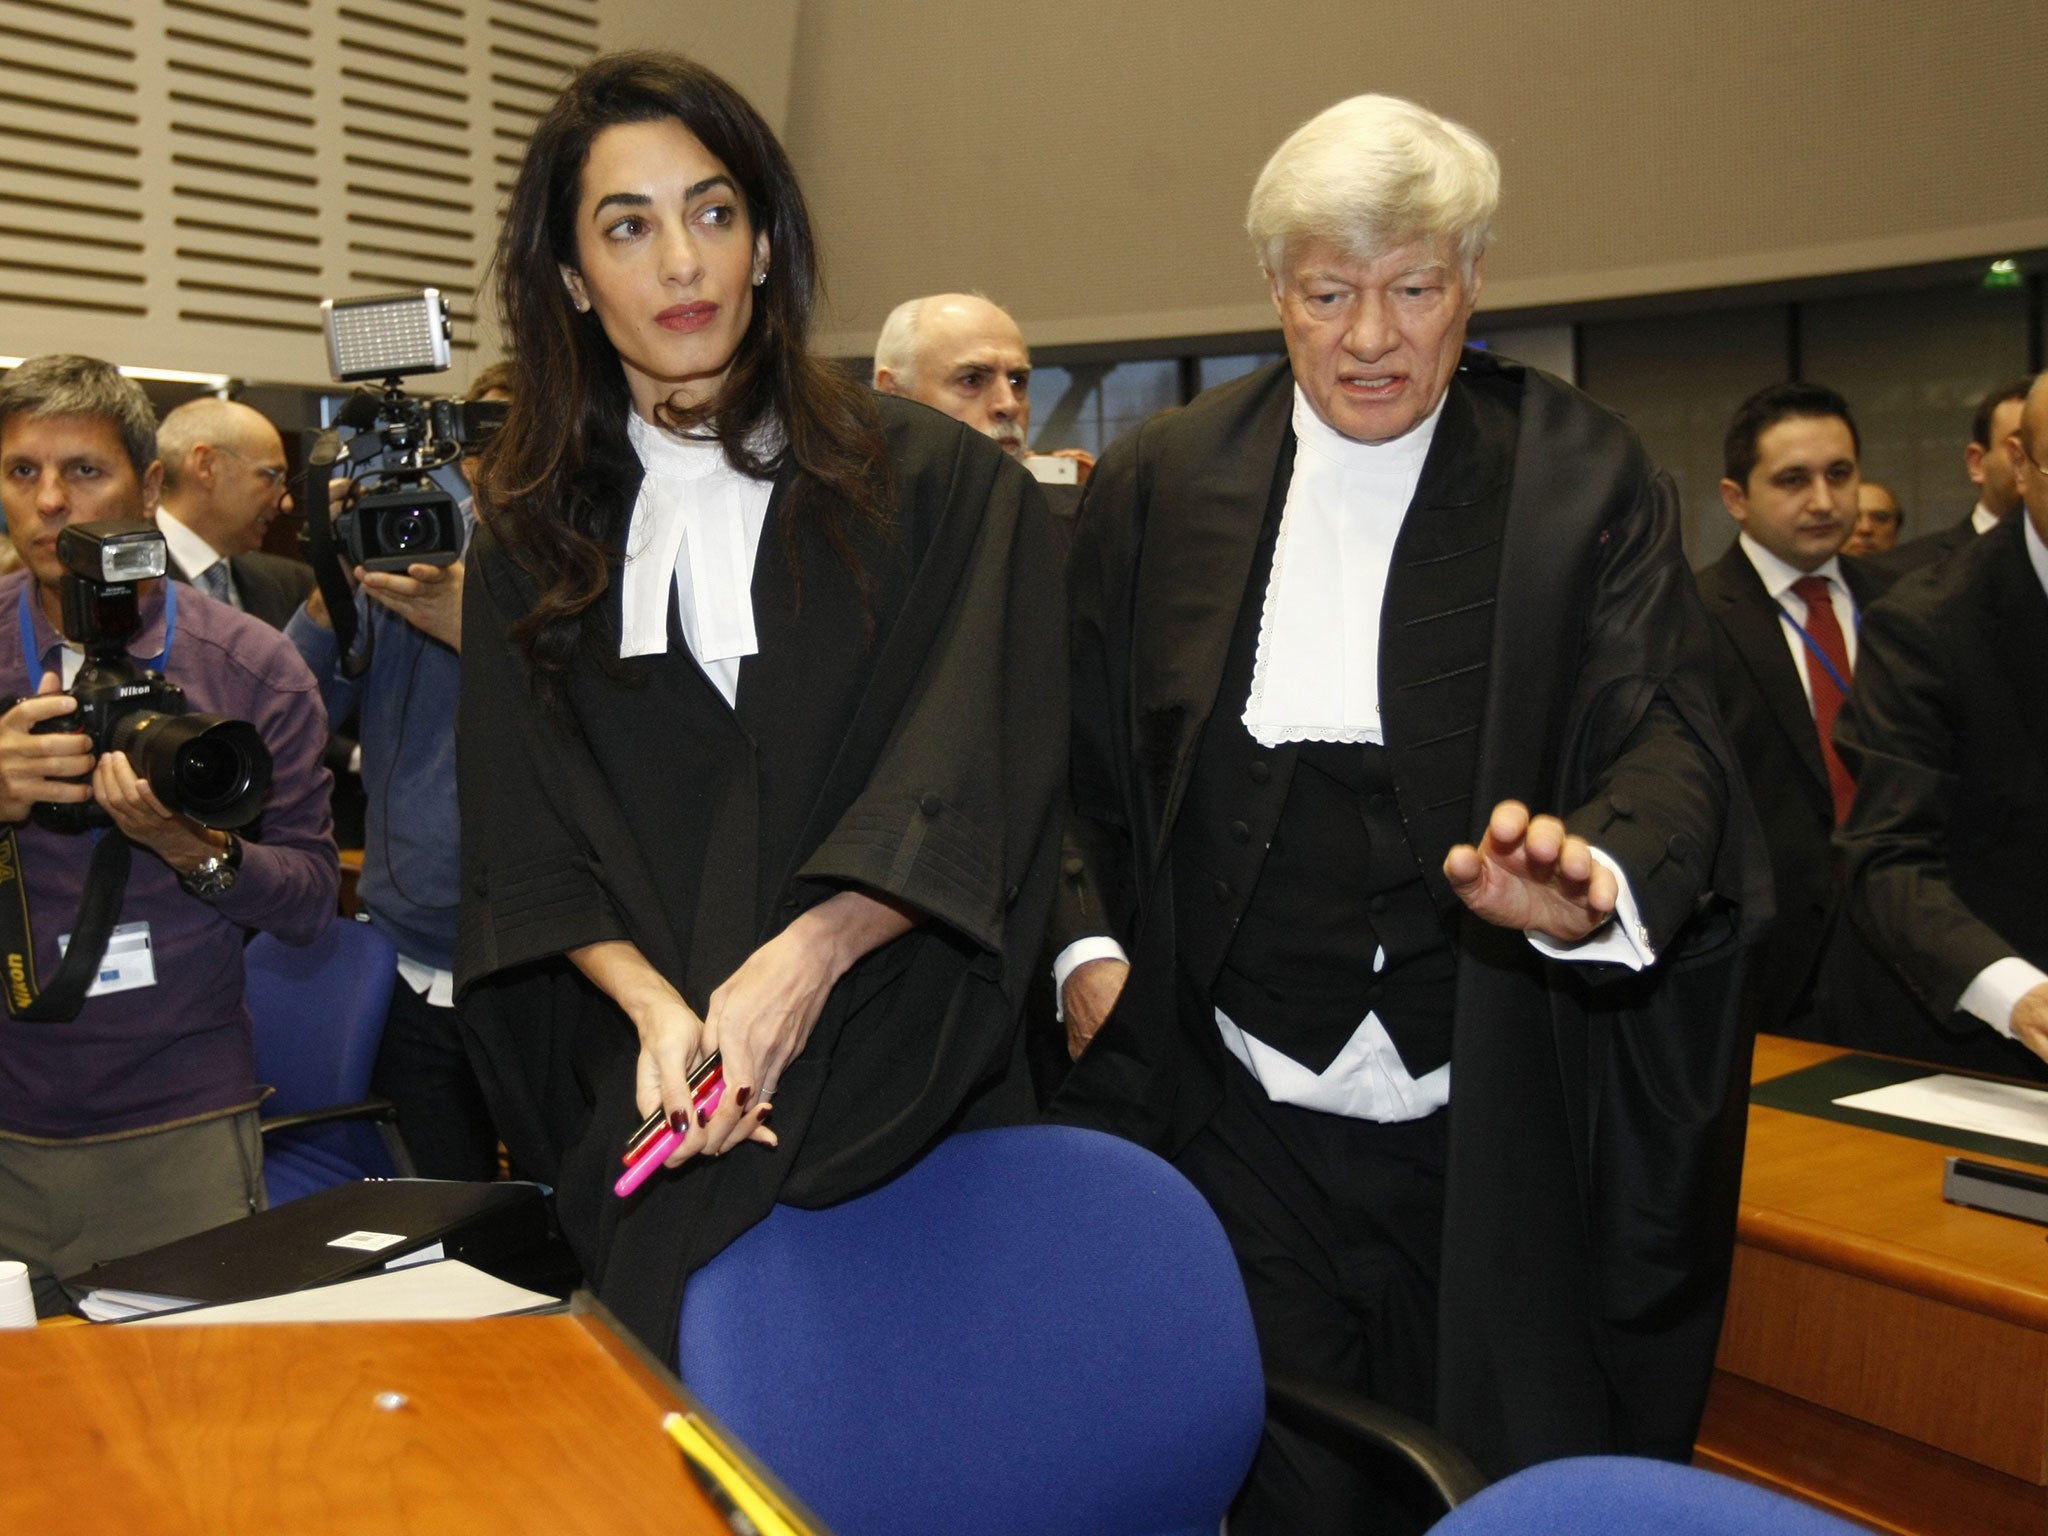 Geoffrey Robertson, right, a member of a legal team representing Armenia, takes his seat with his colleague Amal Clooney as they arrive at the European Court of Human rights 